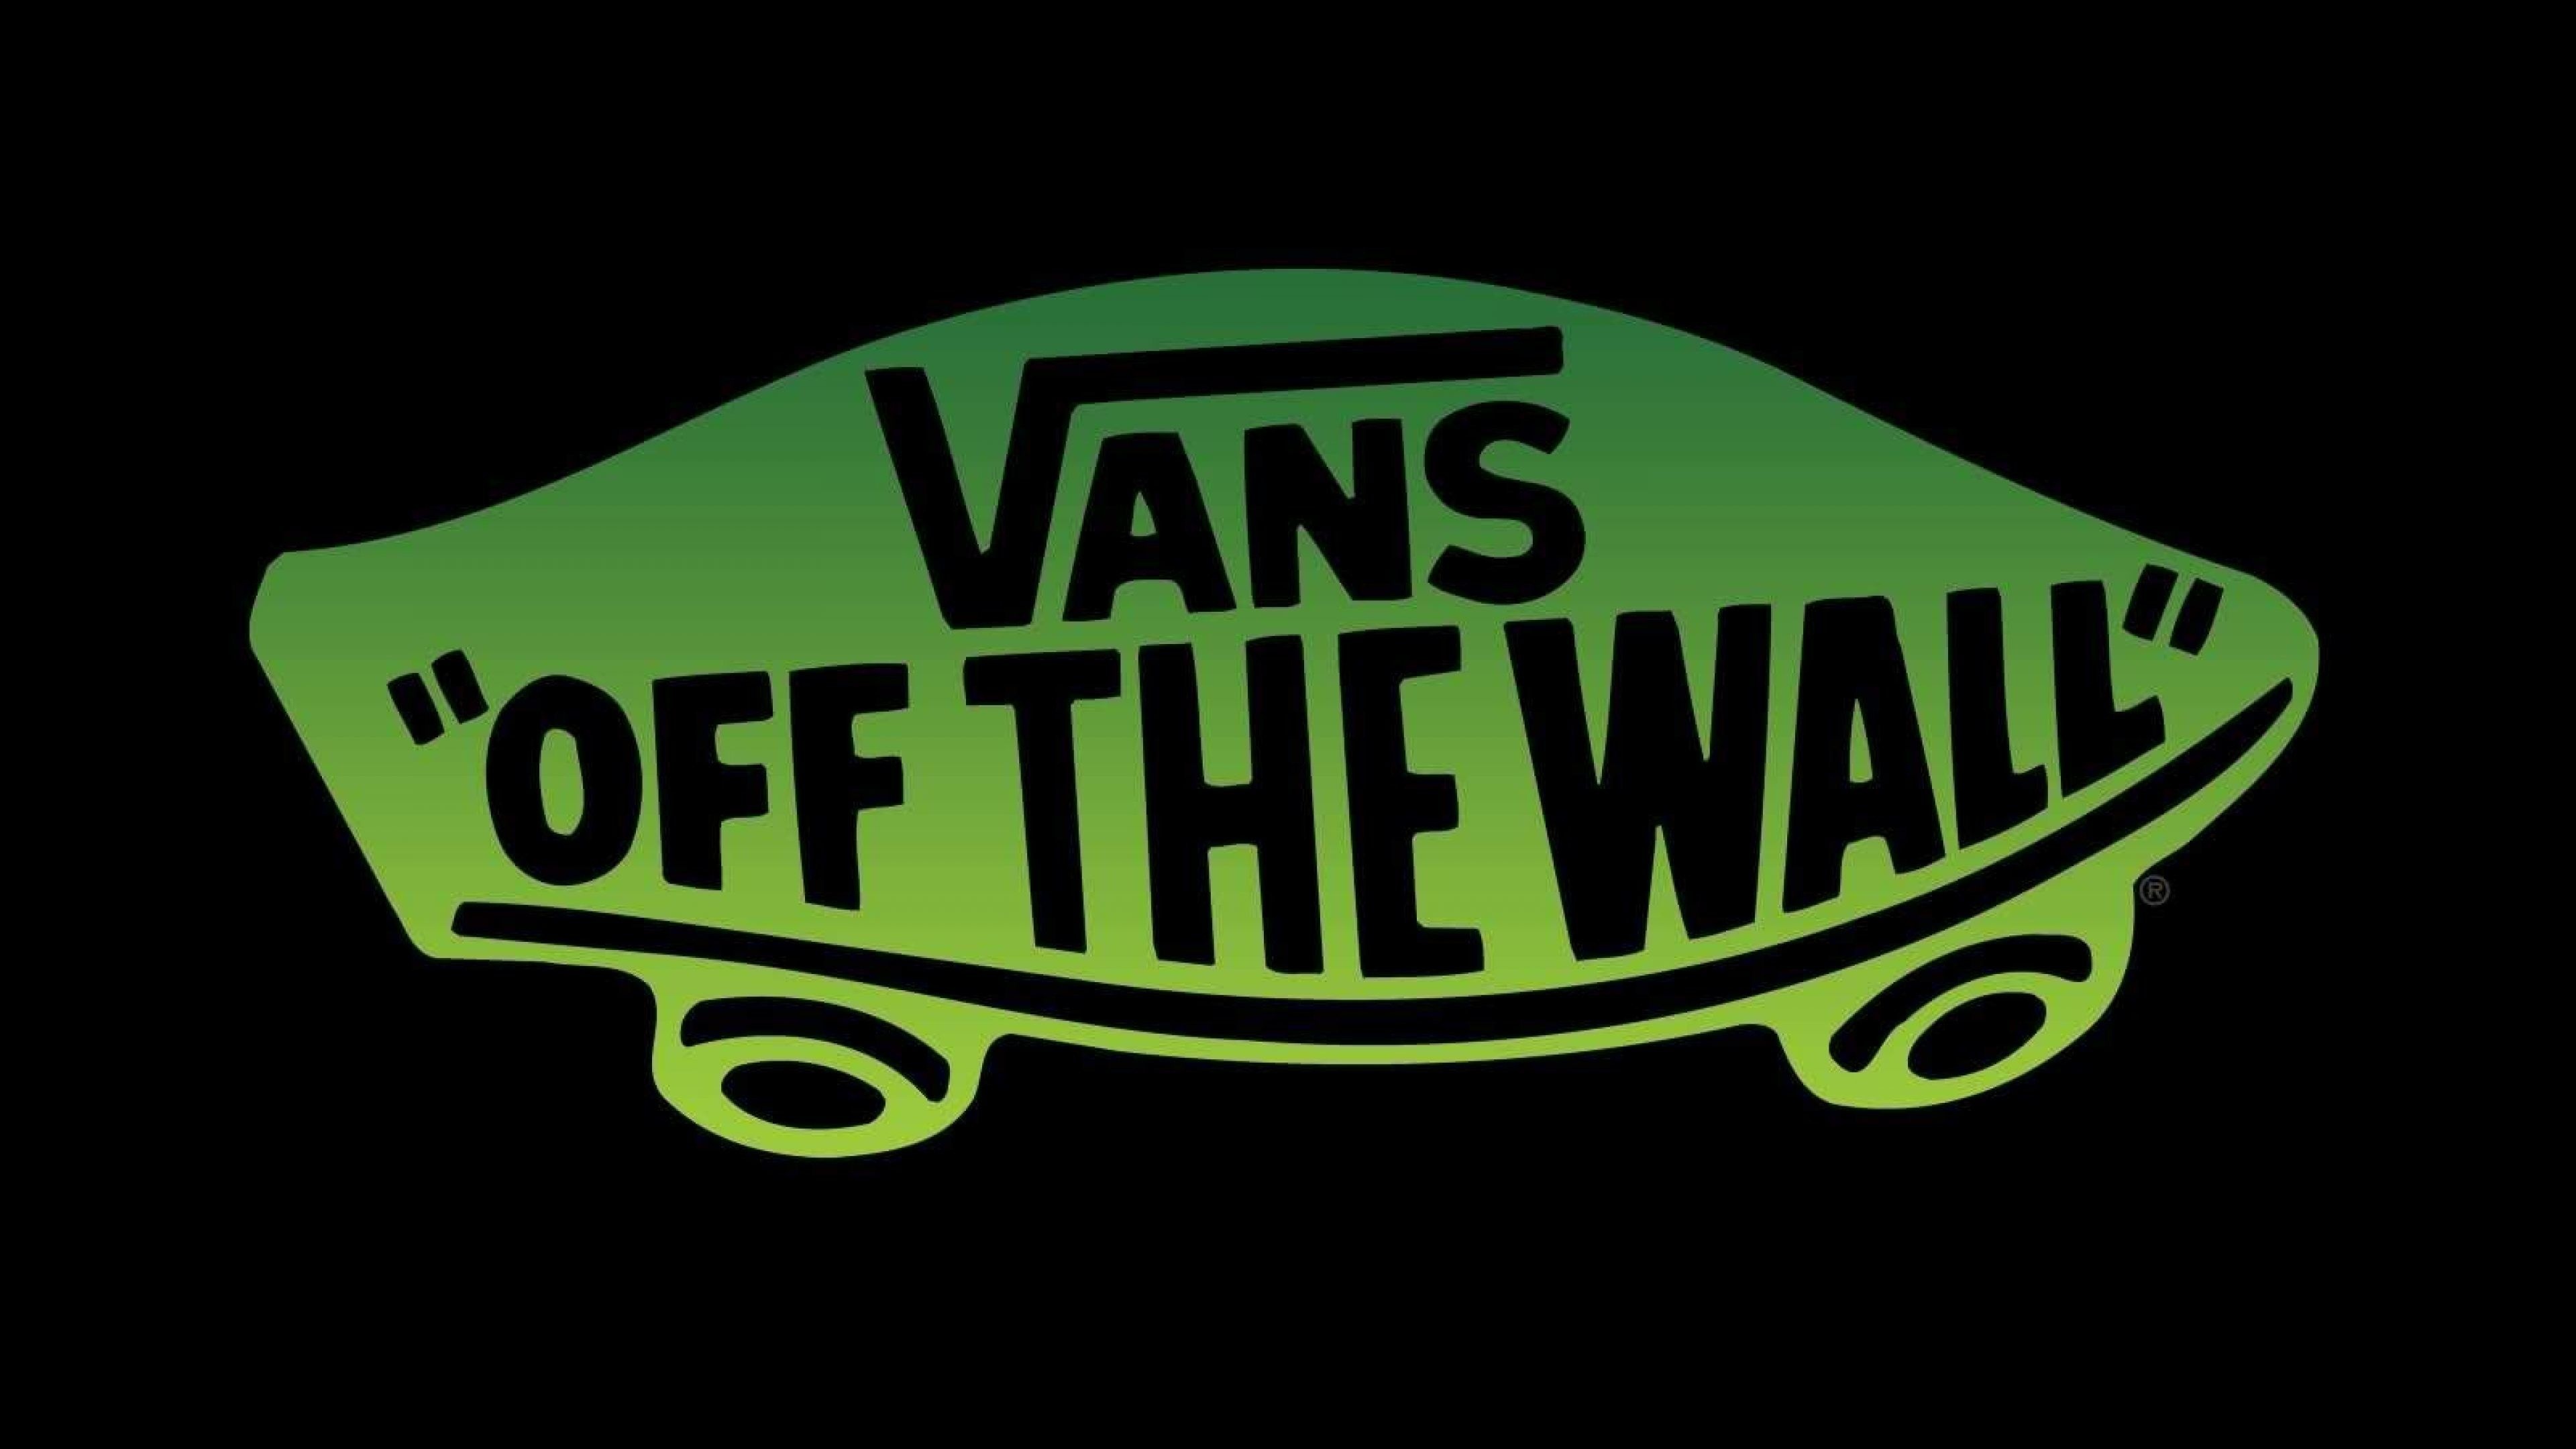 Vans: The brand widely known among young people and athletes, Anaheim, California. 3840x2160 4K Wallpaper.